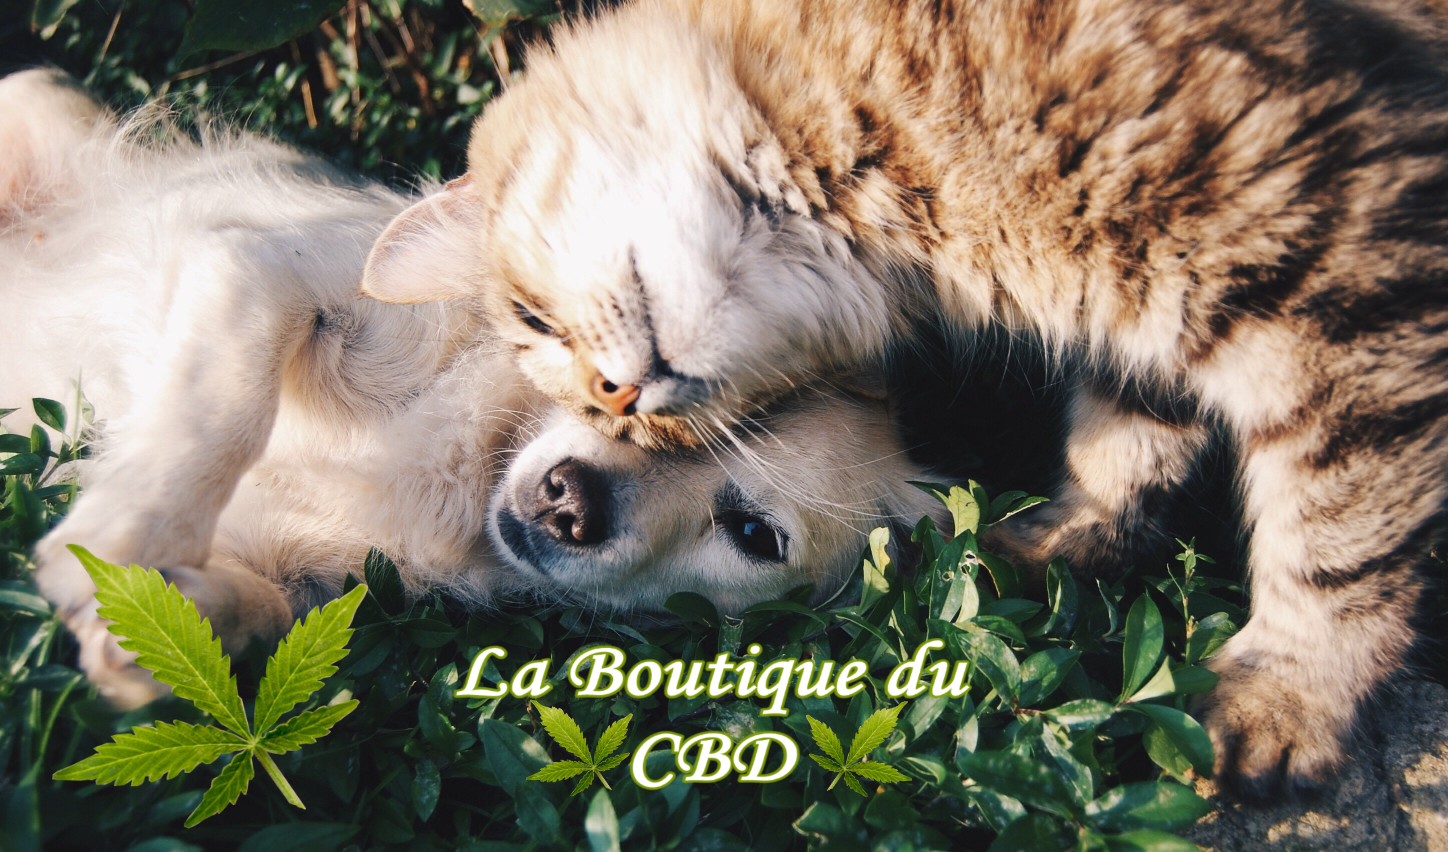 HUILE CBD POUR ANIMAUX CHESSY 77